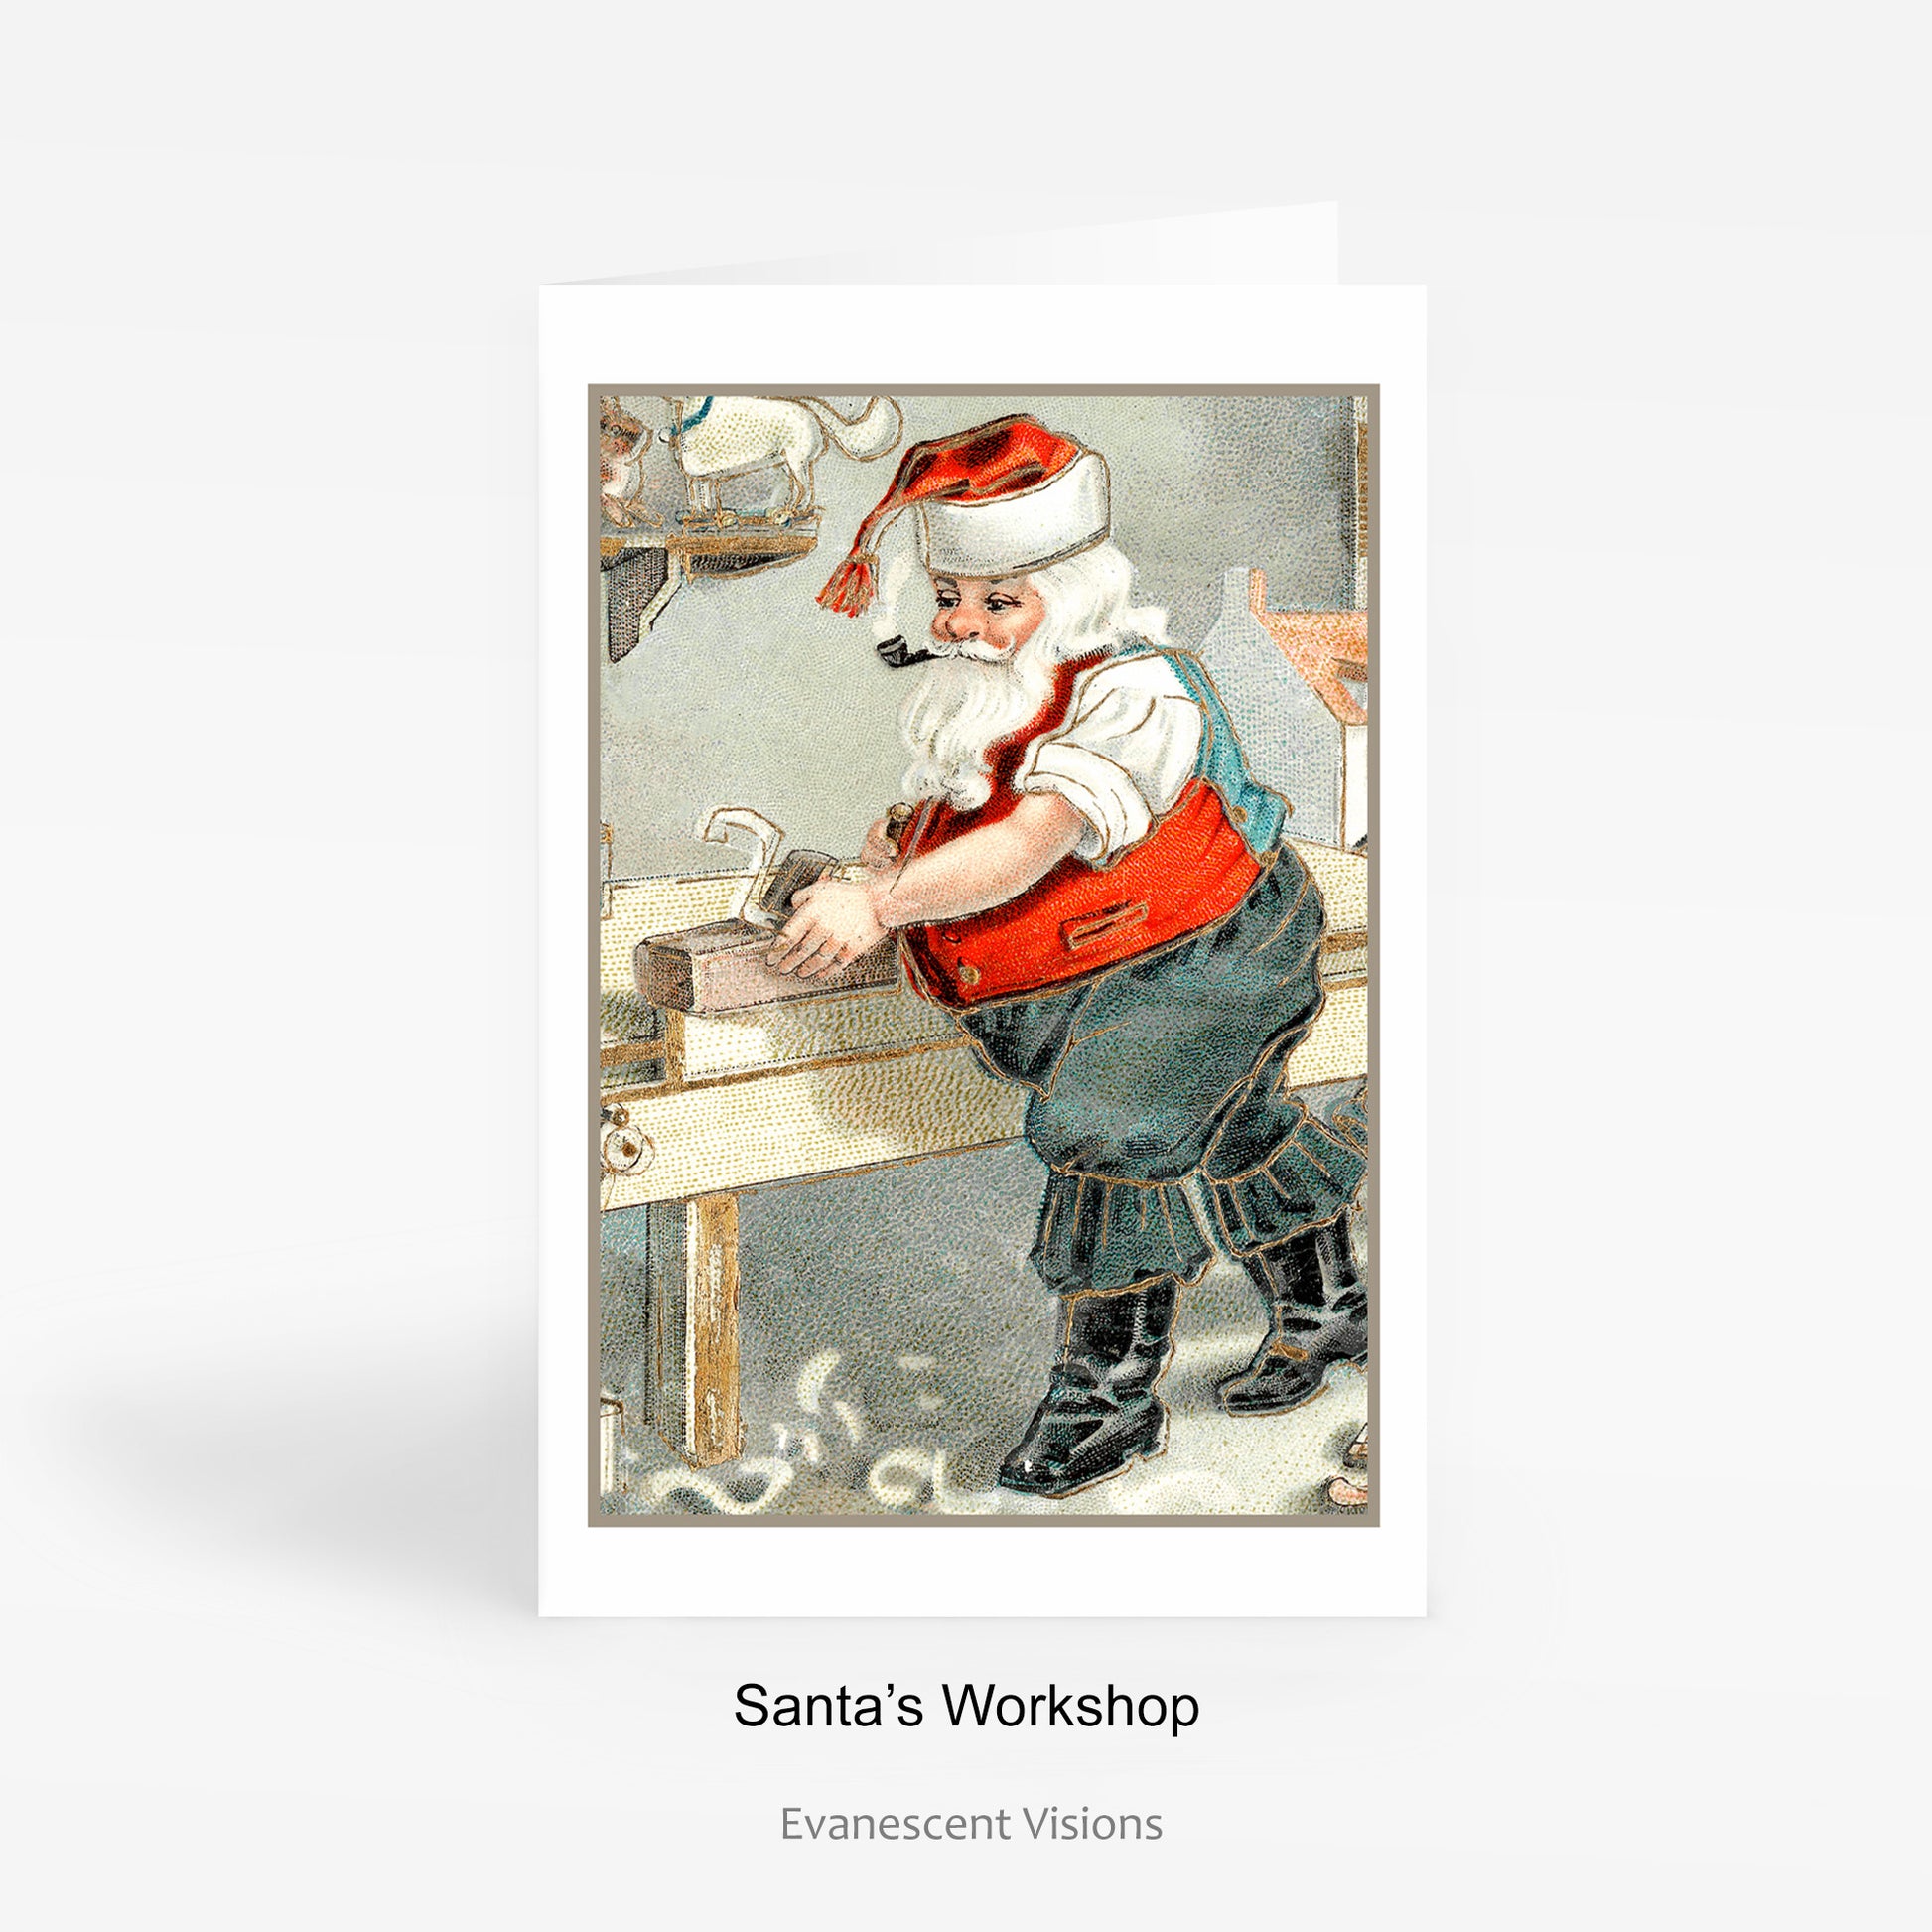 Vintage Victorian and Edwardian Illustration Christmas Card with Santa in his workshop